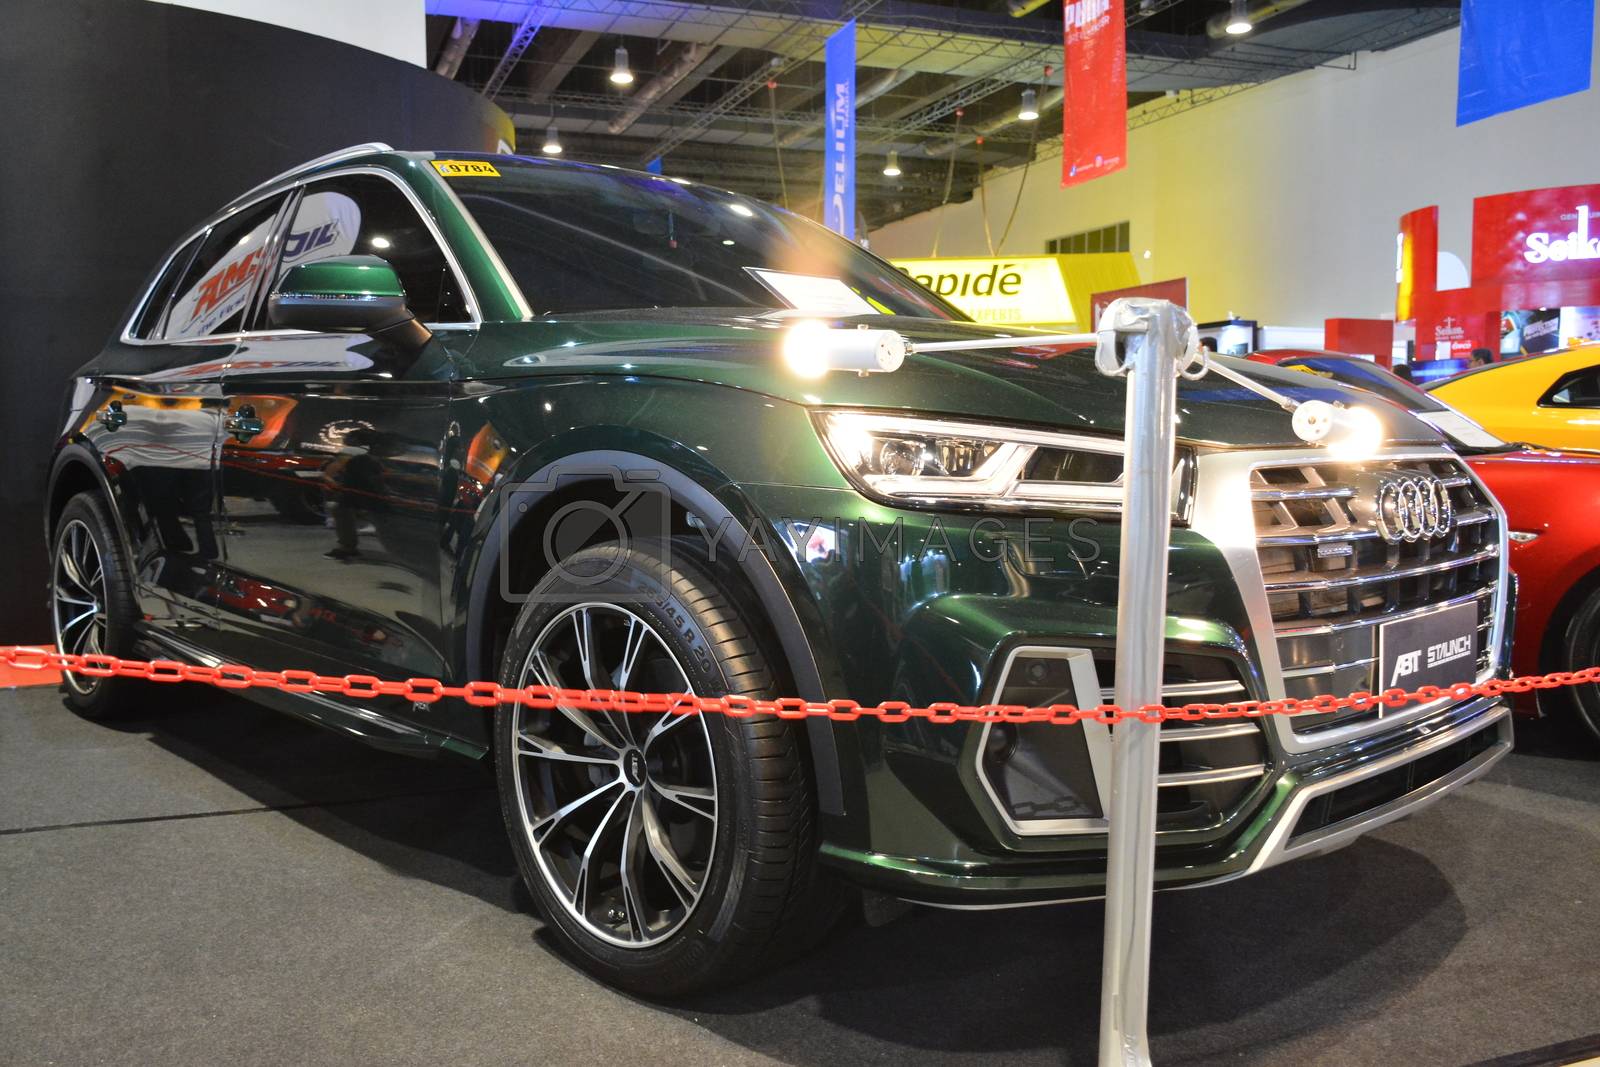 Royalty free image of Audi sq5 suv at Manila Auto Salon car show in Pasay, Philippines by imwaltersy